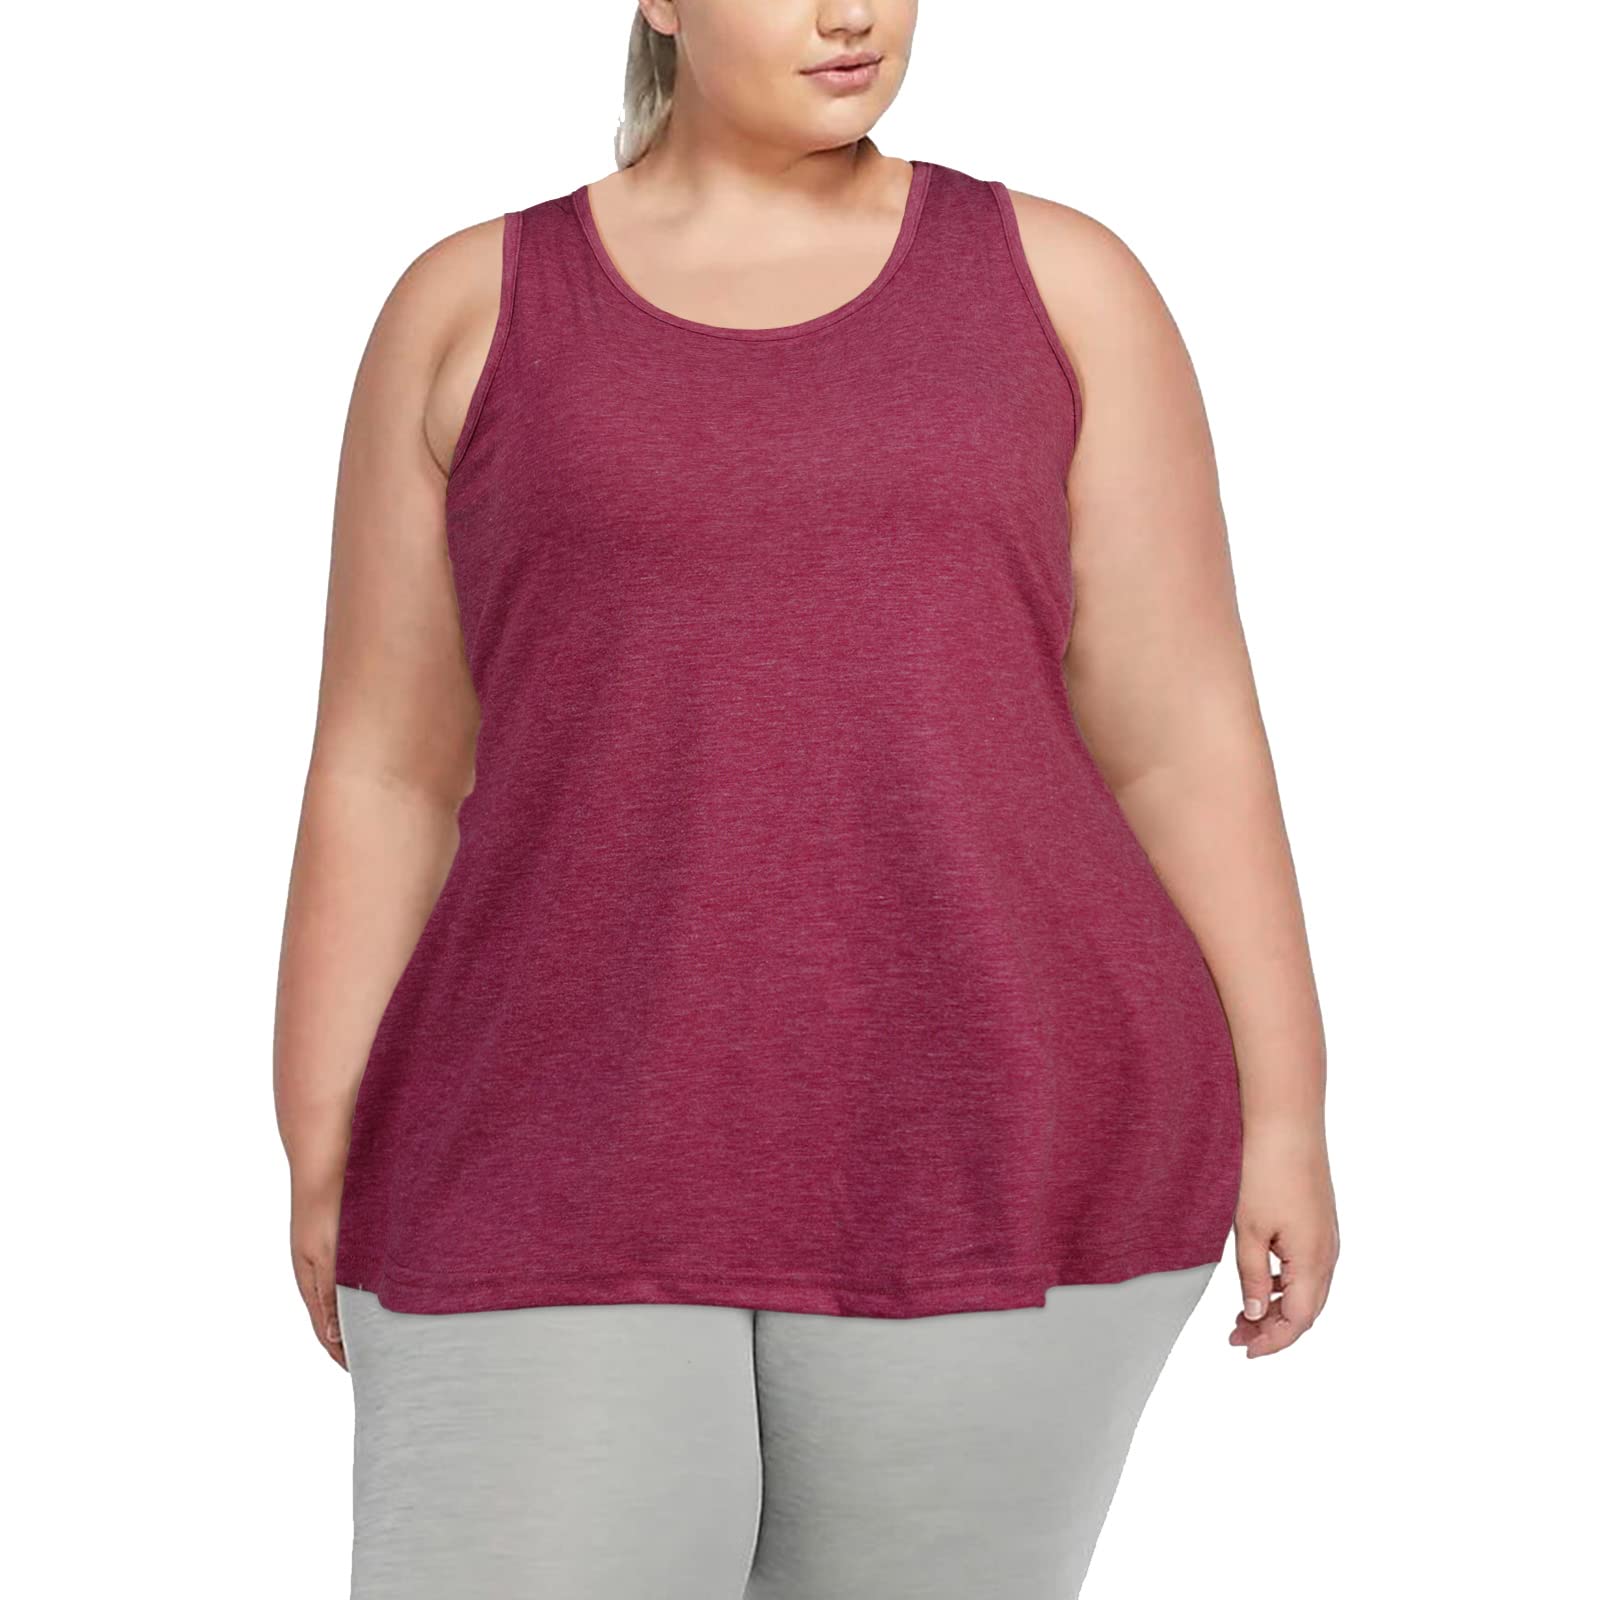 Plus Size Tank Tops for Women Summer Sleeveless T-Shirts Loose-Wine Red - Moon Wood